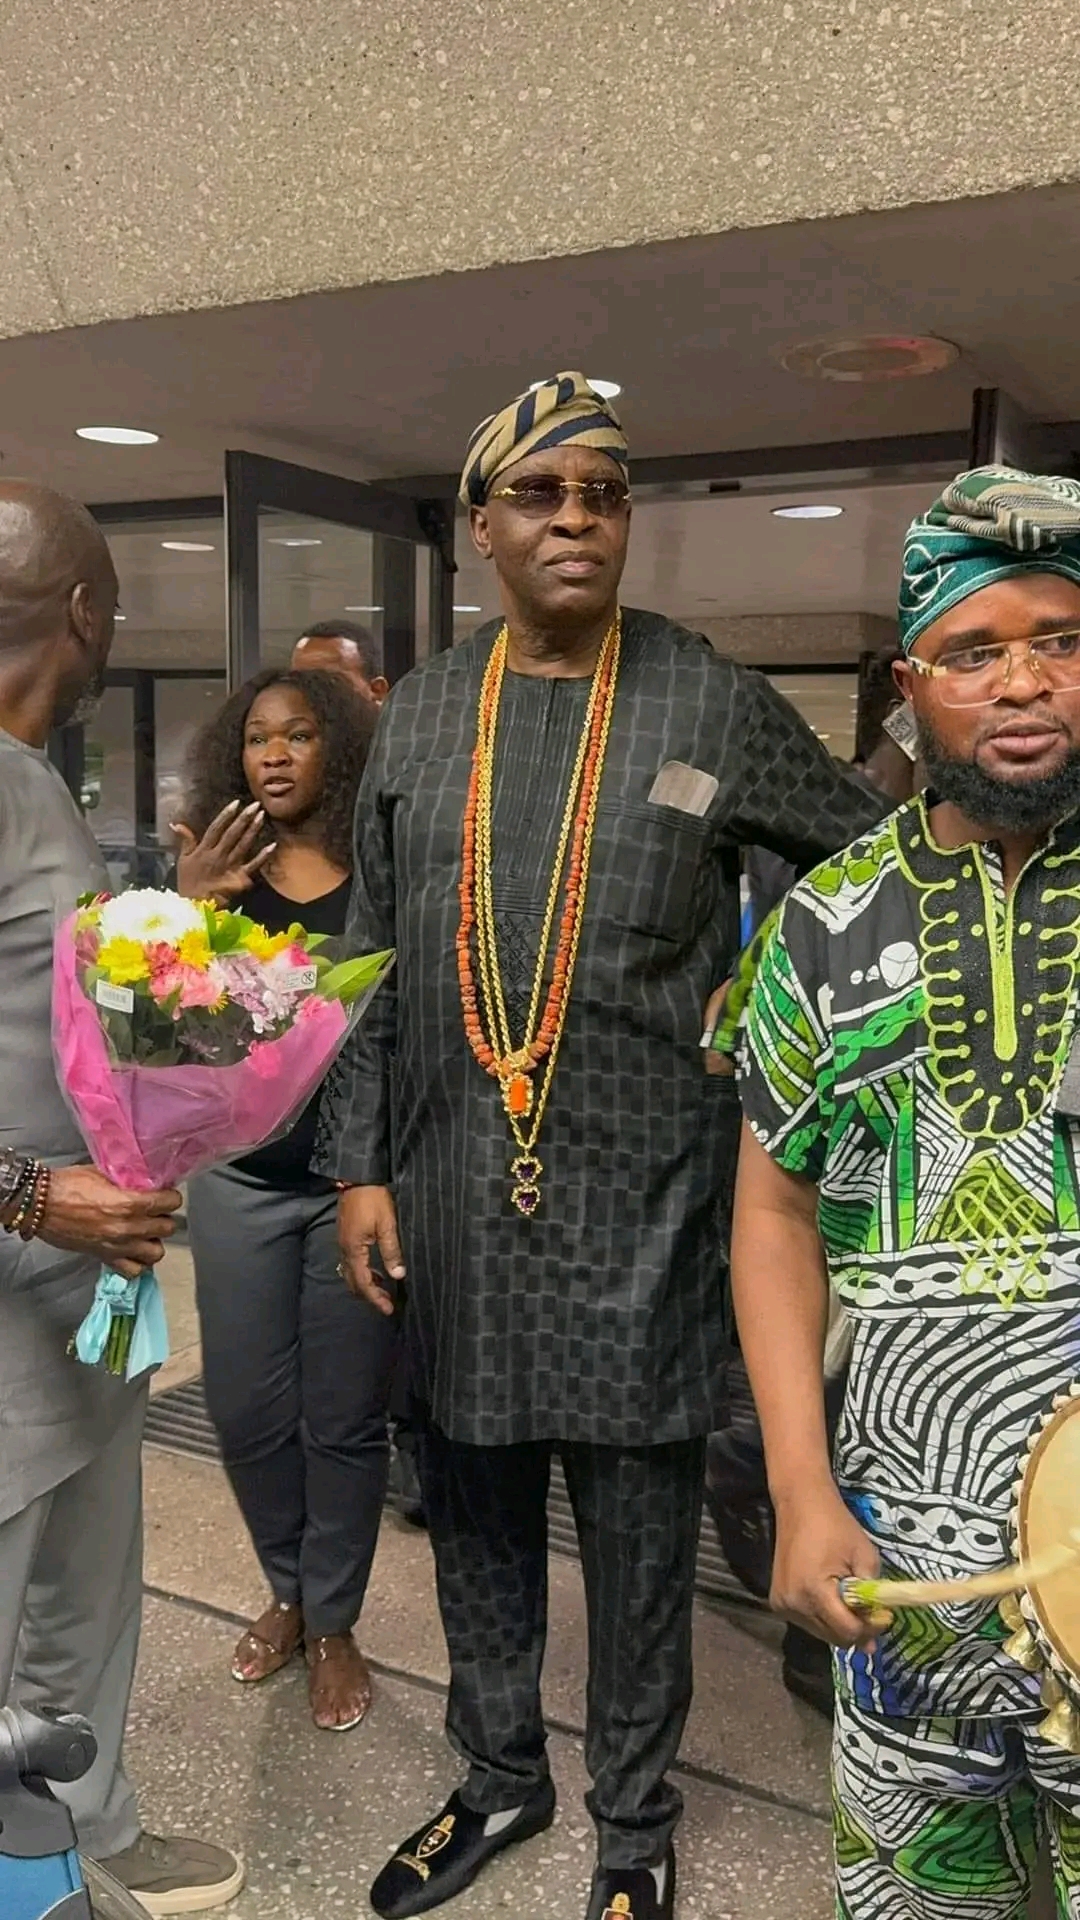 PHOTOS: Soun of Ogbomoso Arrives in USA to Engage with Ogbomoso Community in North America